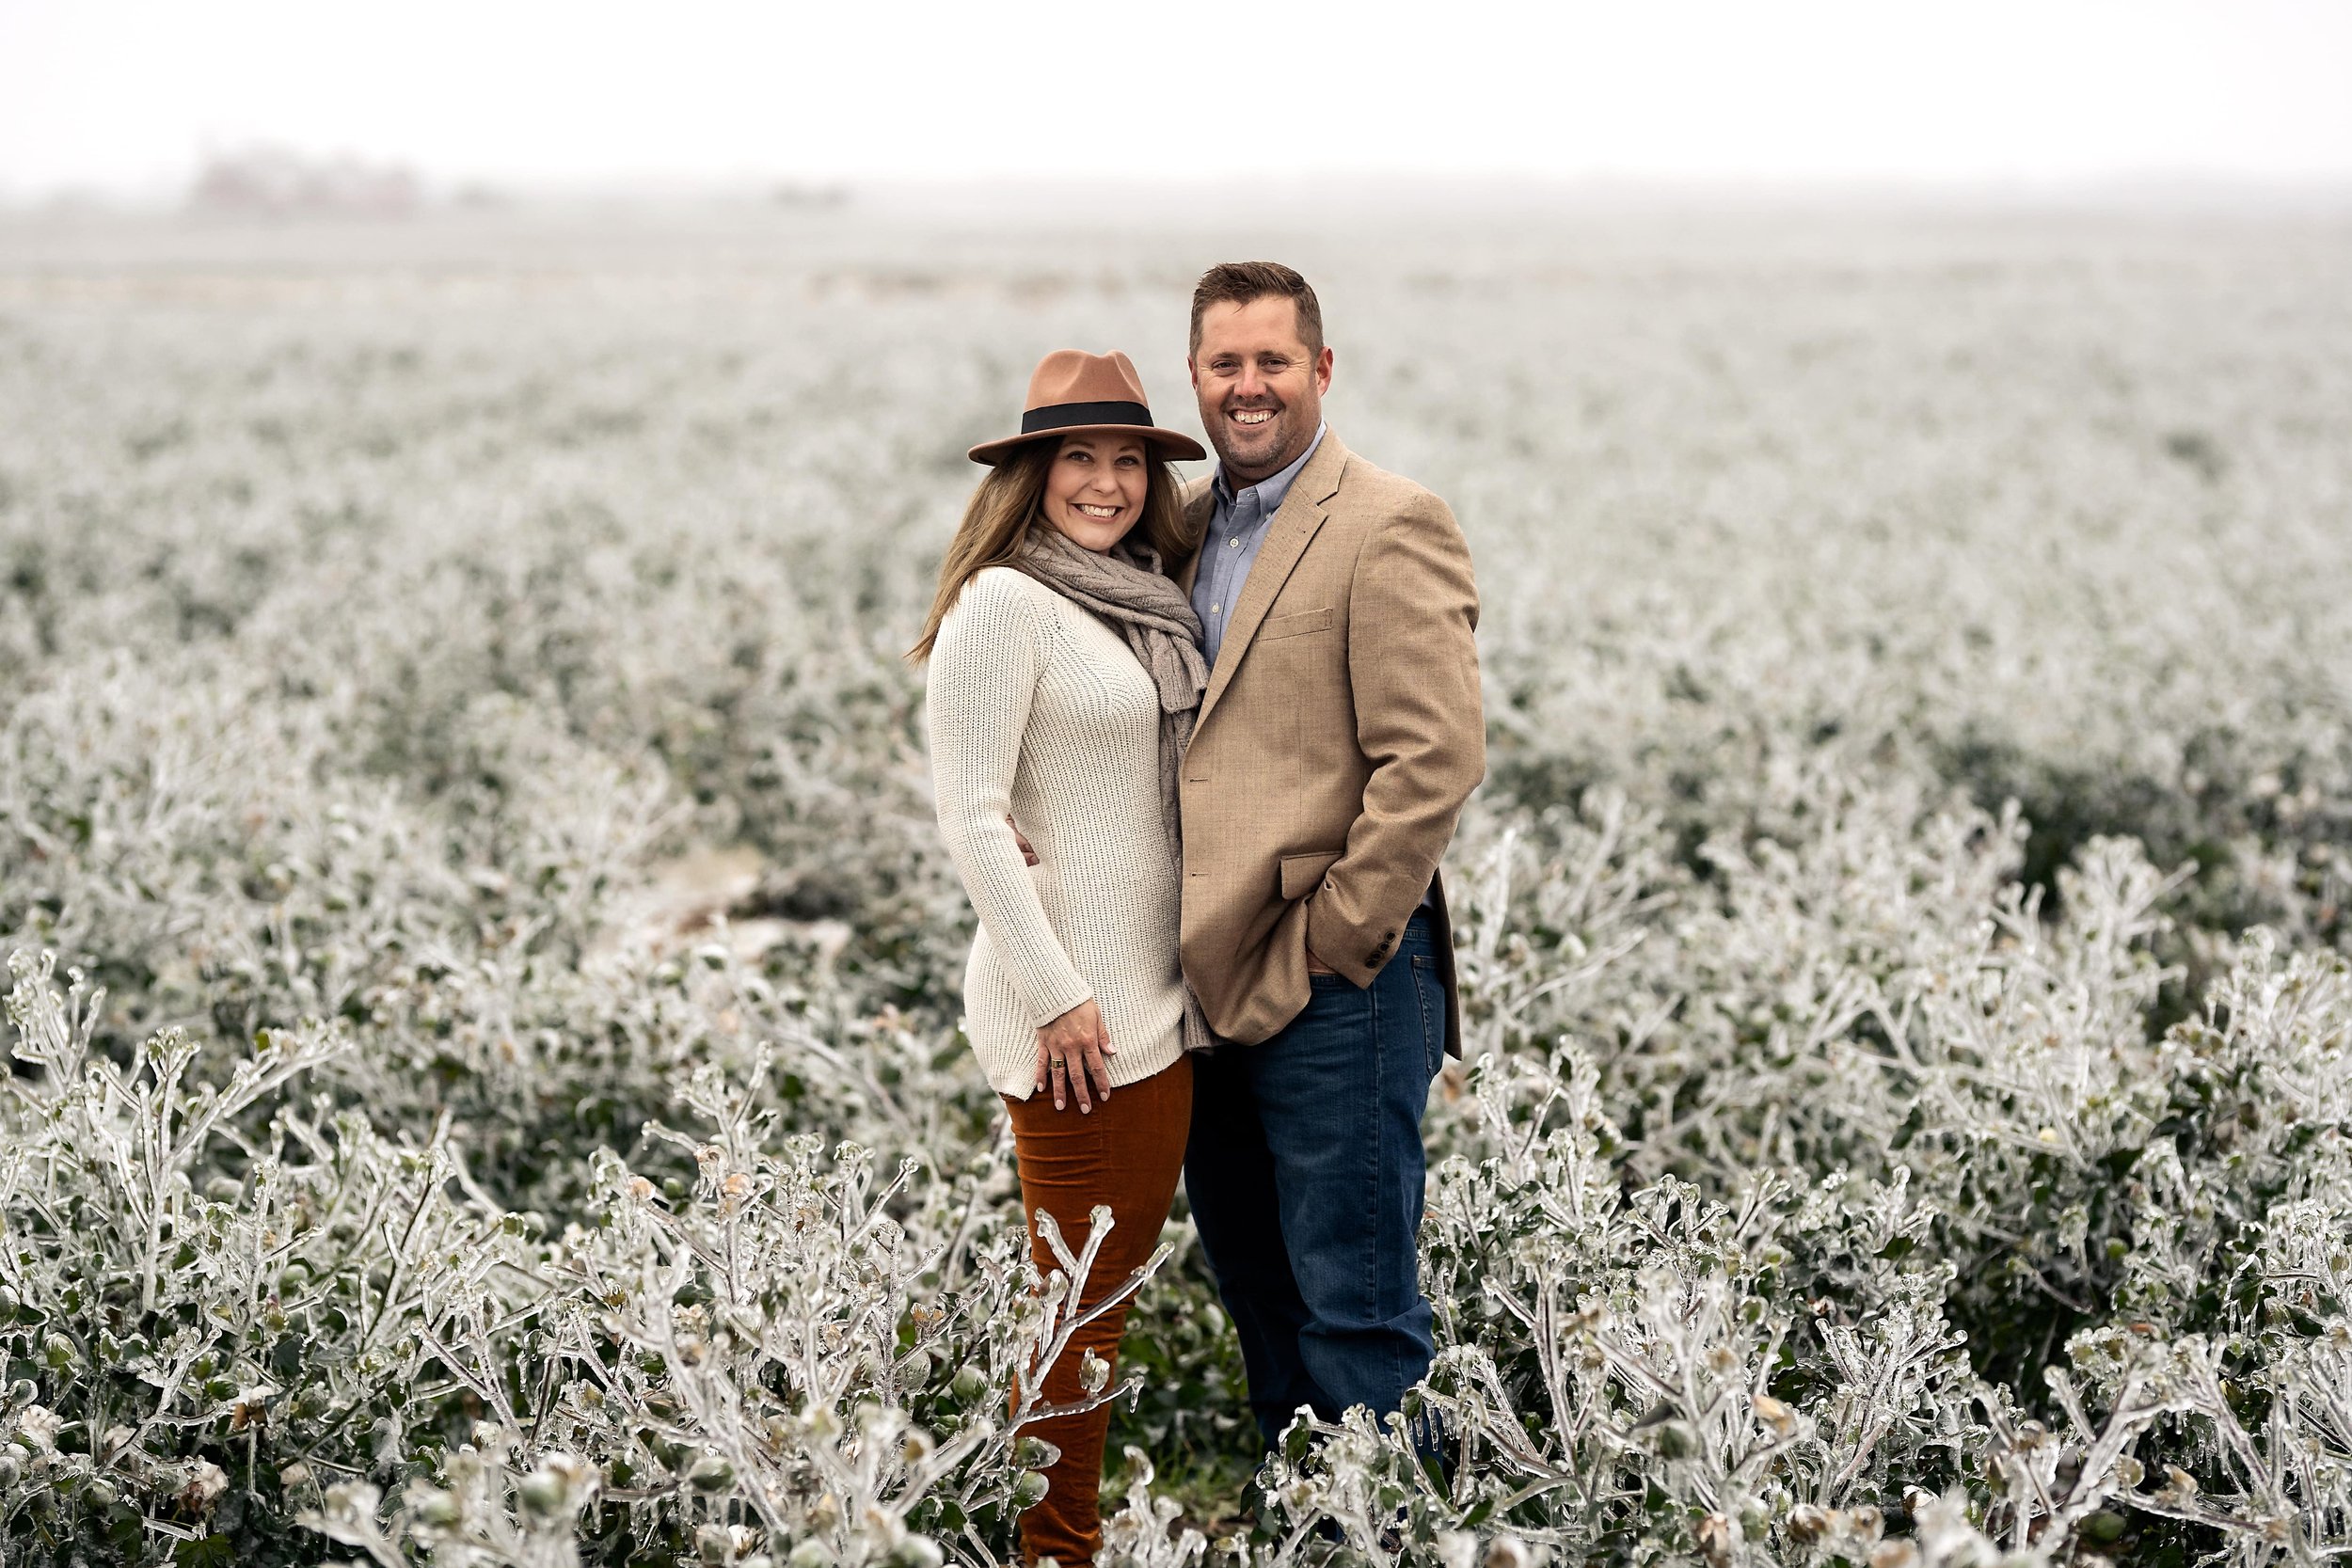 Angie Perisse - Portfolio - The Frost as a magical backdrop - Children, Pets, Horses, Family and Studio Photo Shoot in Vernon, Texas, USA.